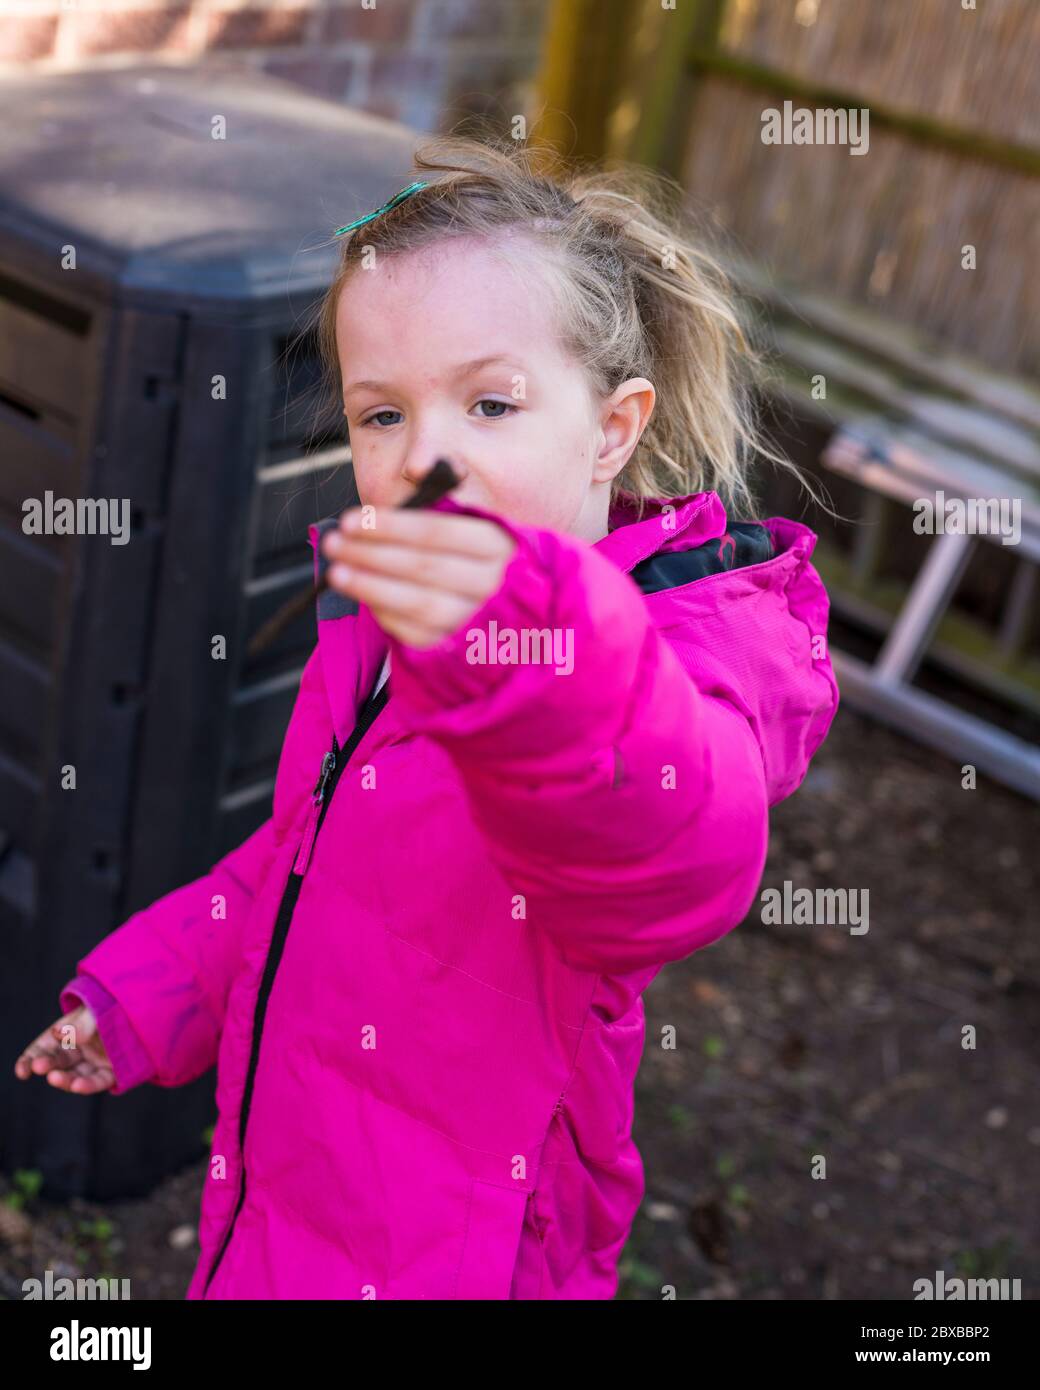 Corona composting, 4 year old pre-school girl emptying out the compost bin, getting your child interesting in gardening. Corona lockdown gardening Stock Photo